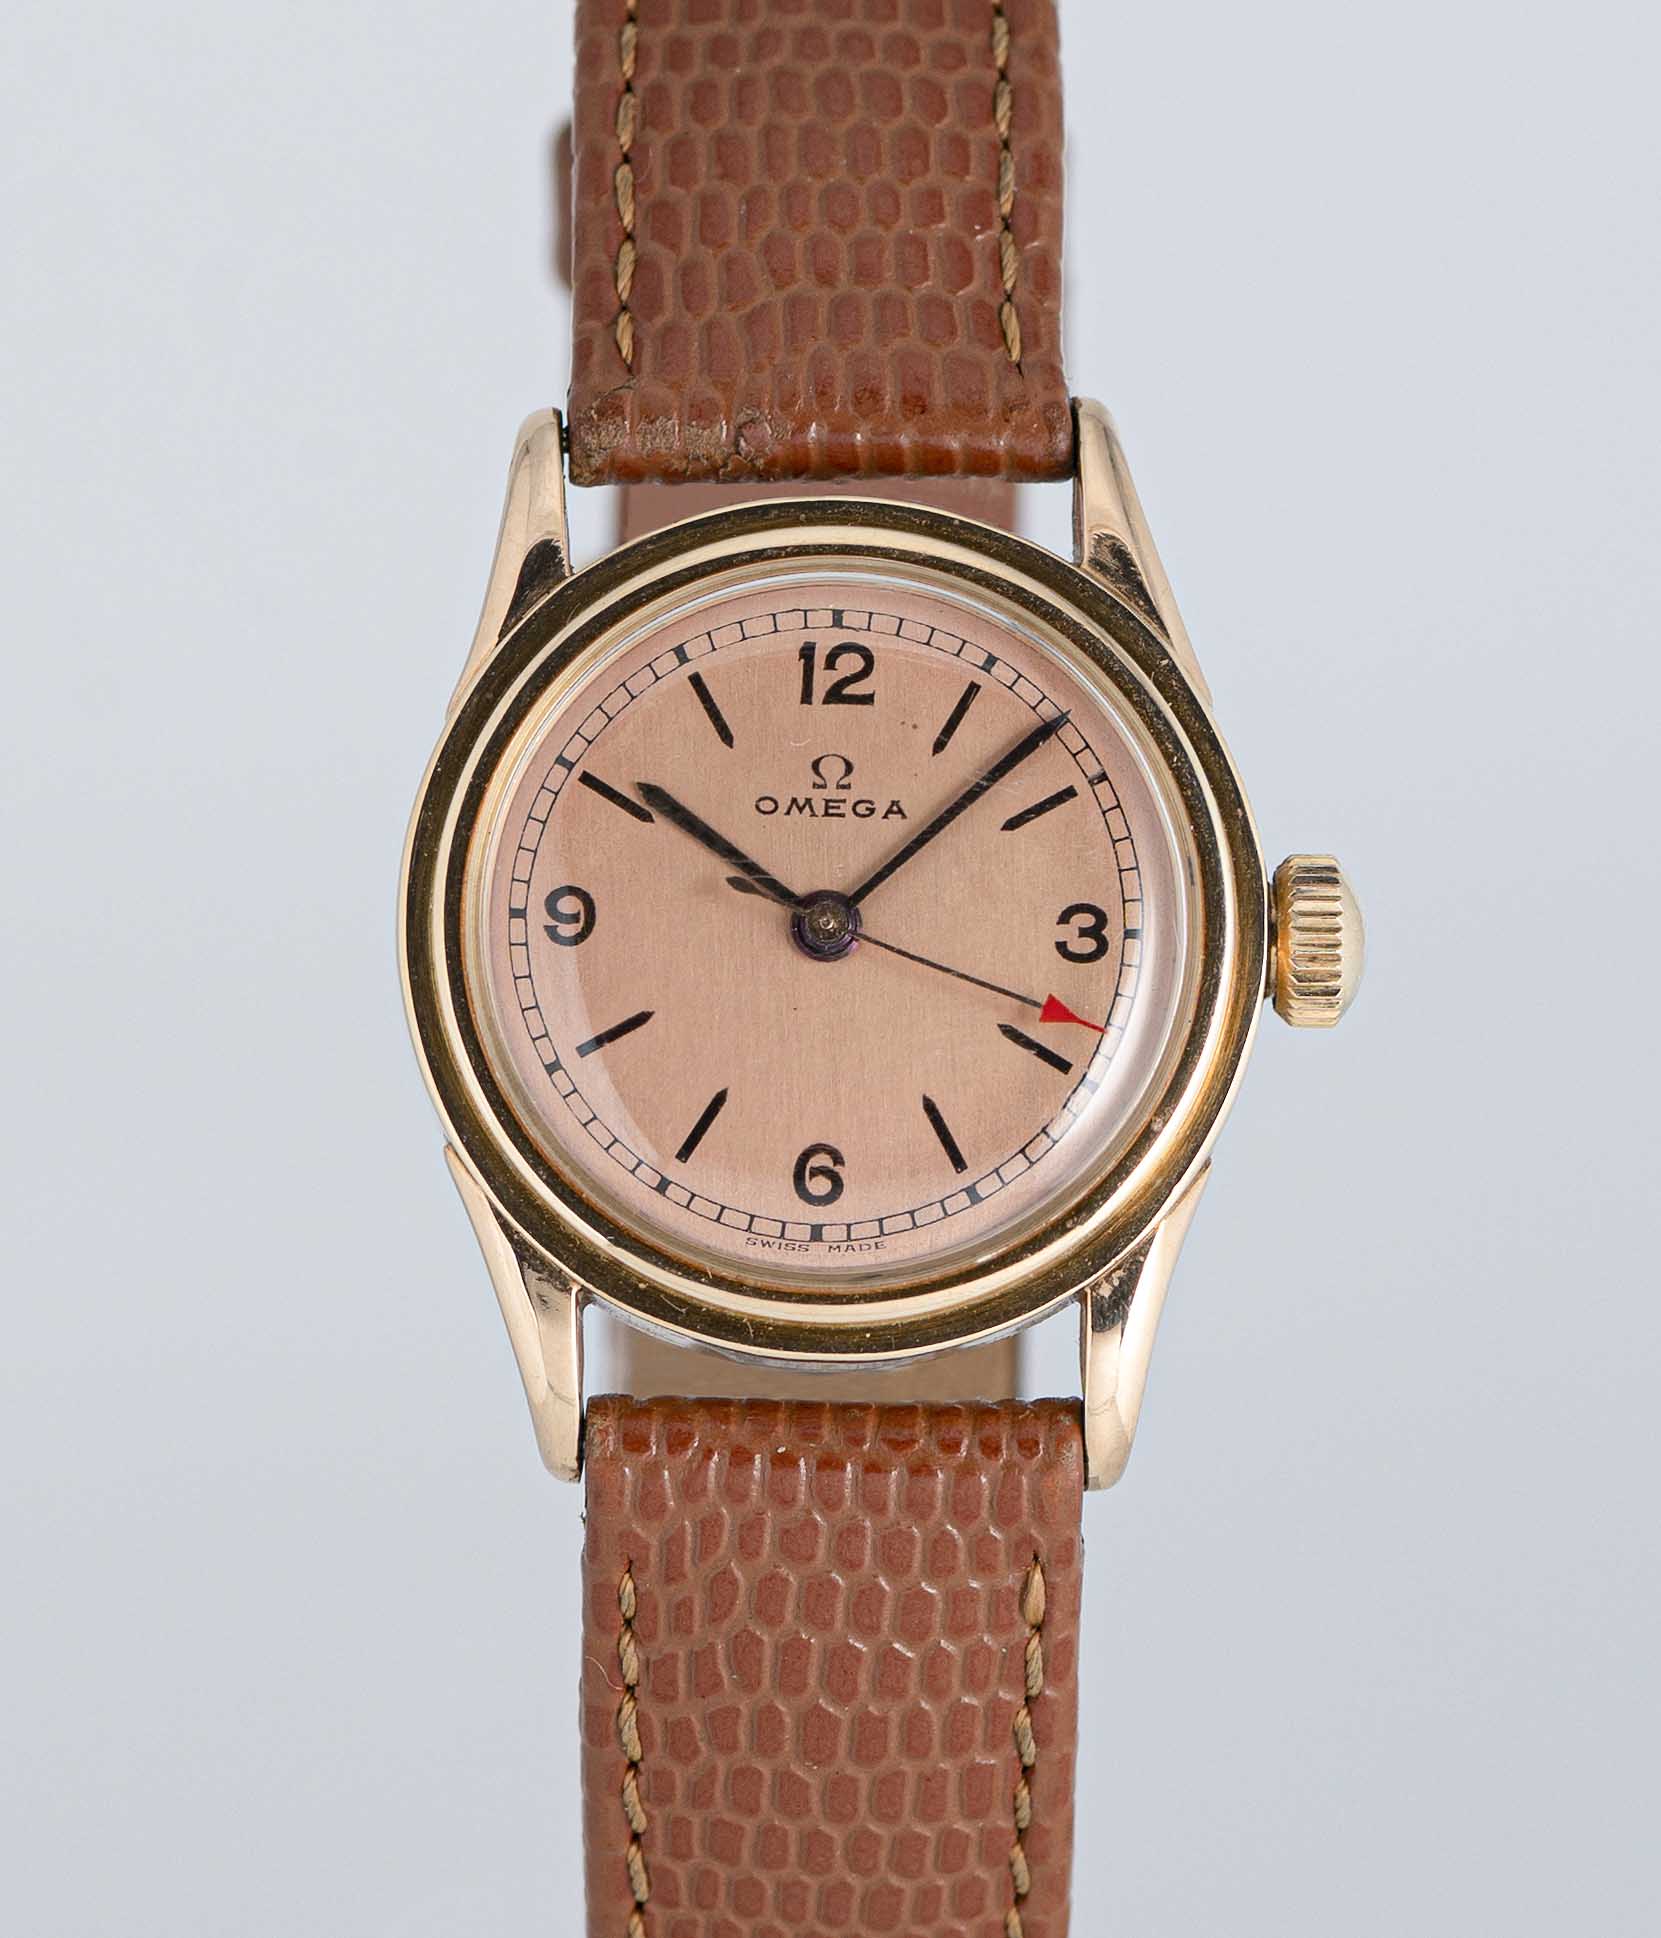 A GENTLEMAN'S SMALL SIZE 14K SOLID GOLD OMEGA WRIST WATCH CIRCA 1939, WITH SALMON DIAL Movement: